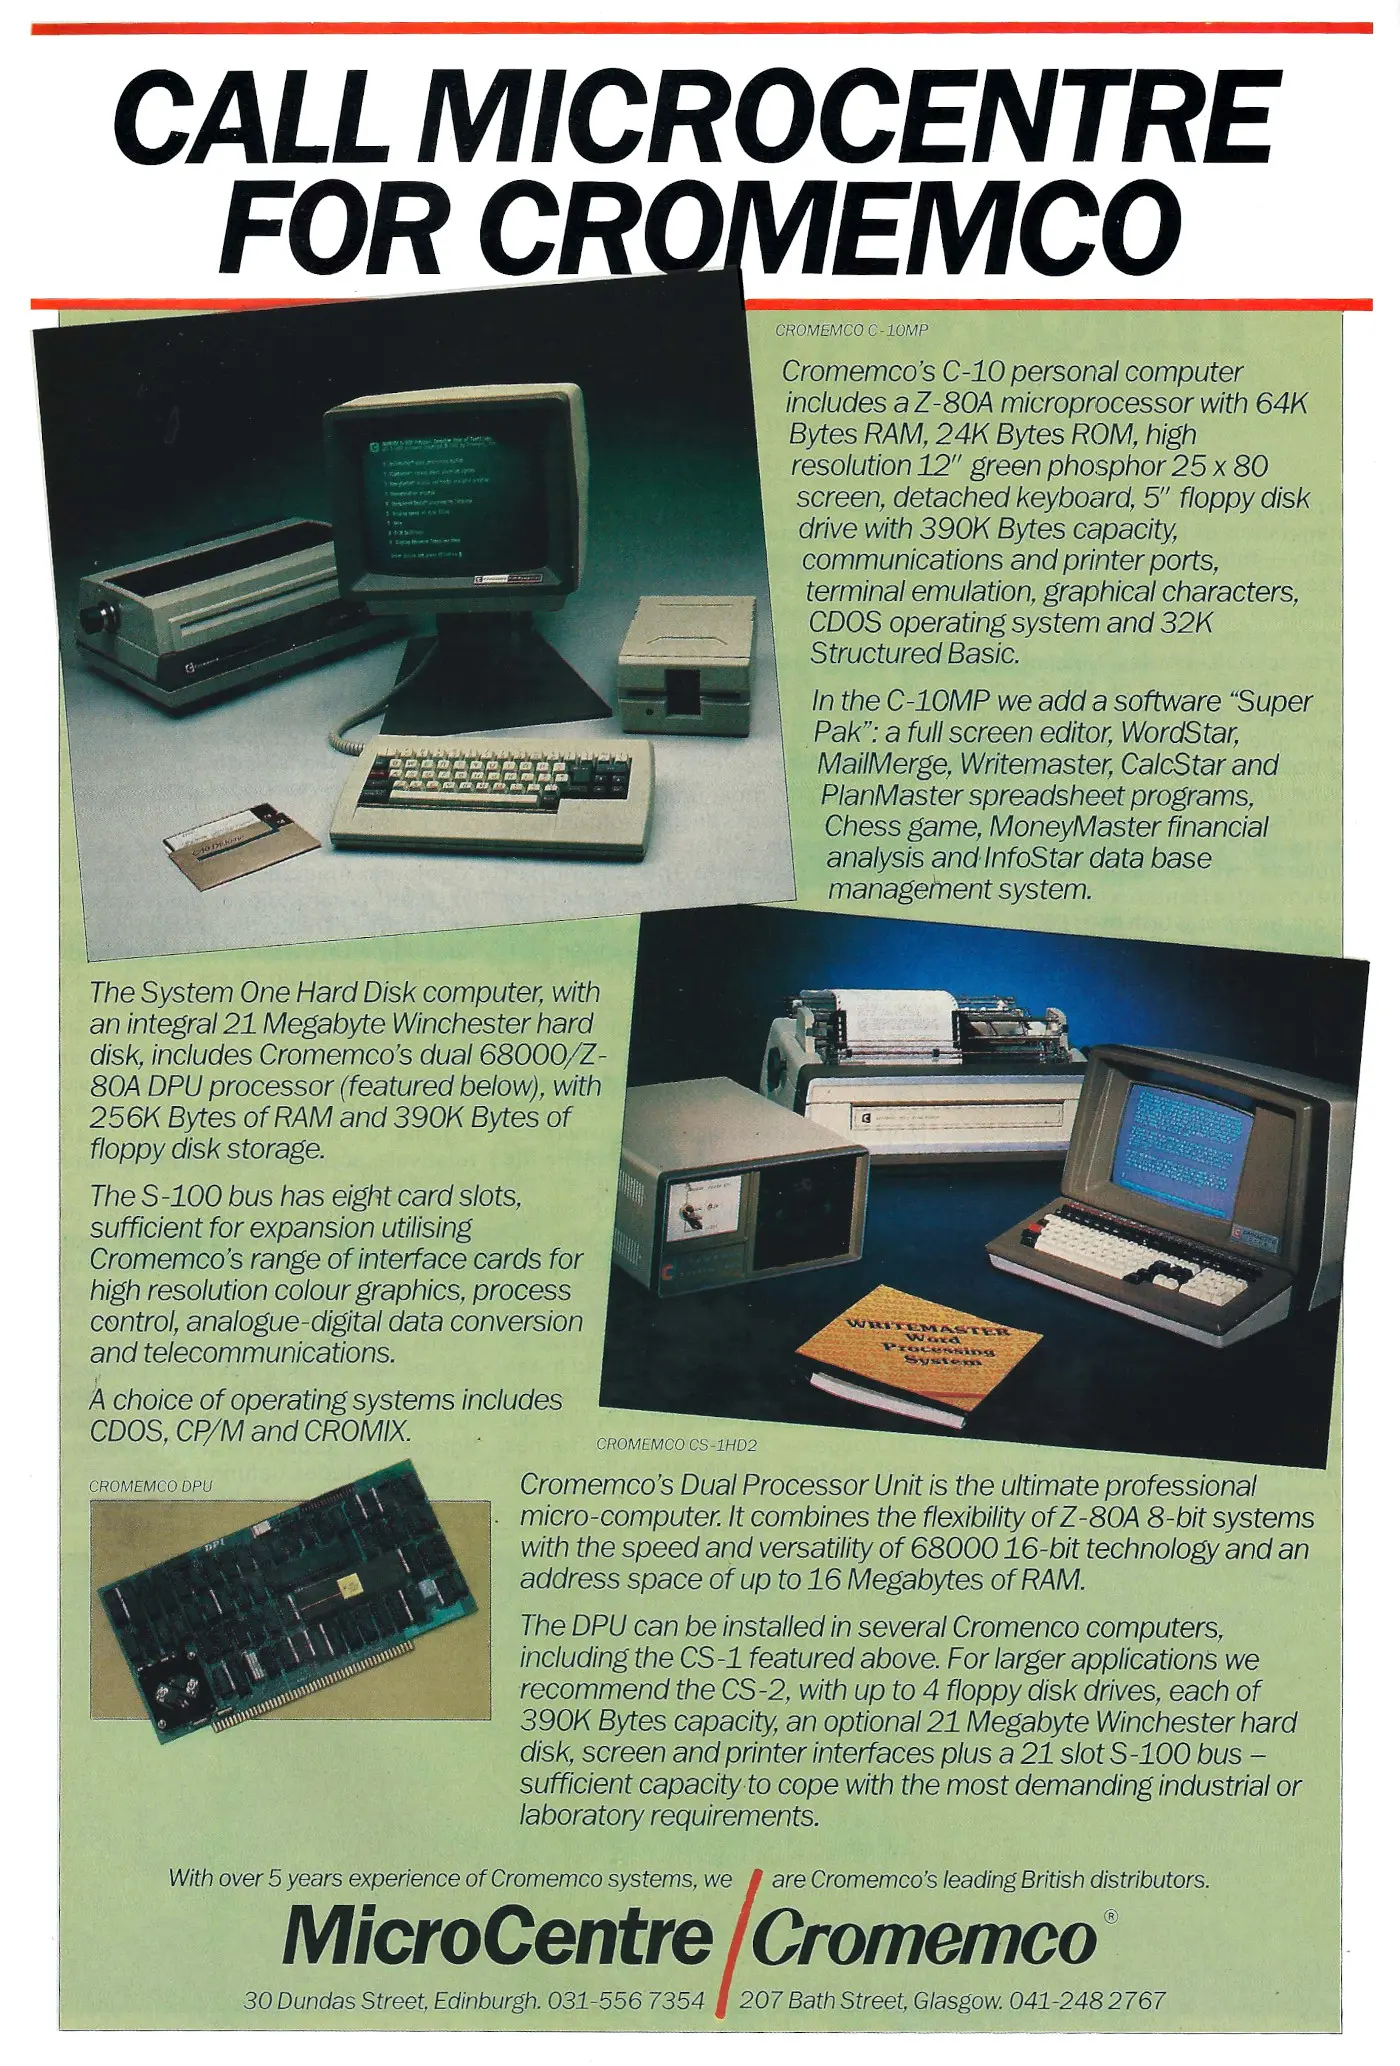 Cromemco Advert: Call Microcentre for Cromemco, from Personal Computer World, March 1984